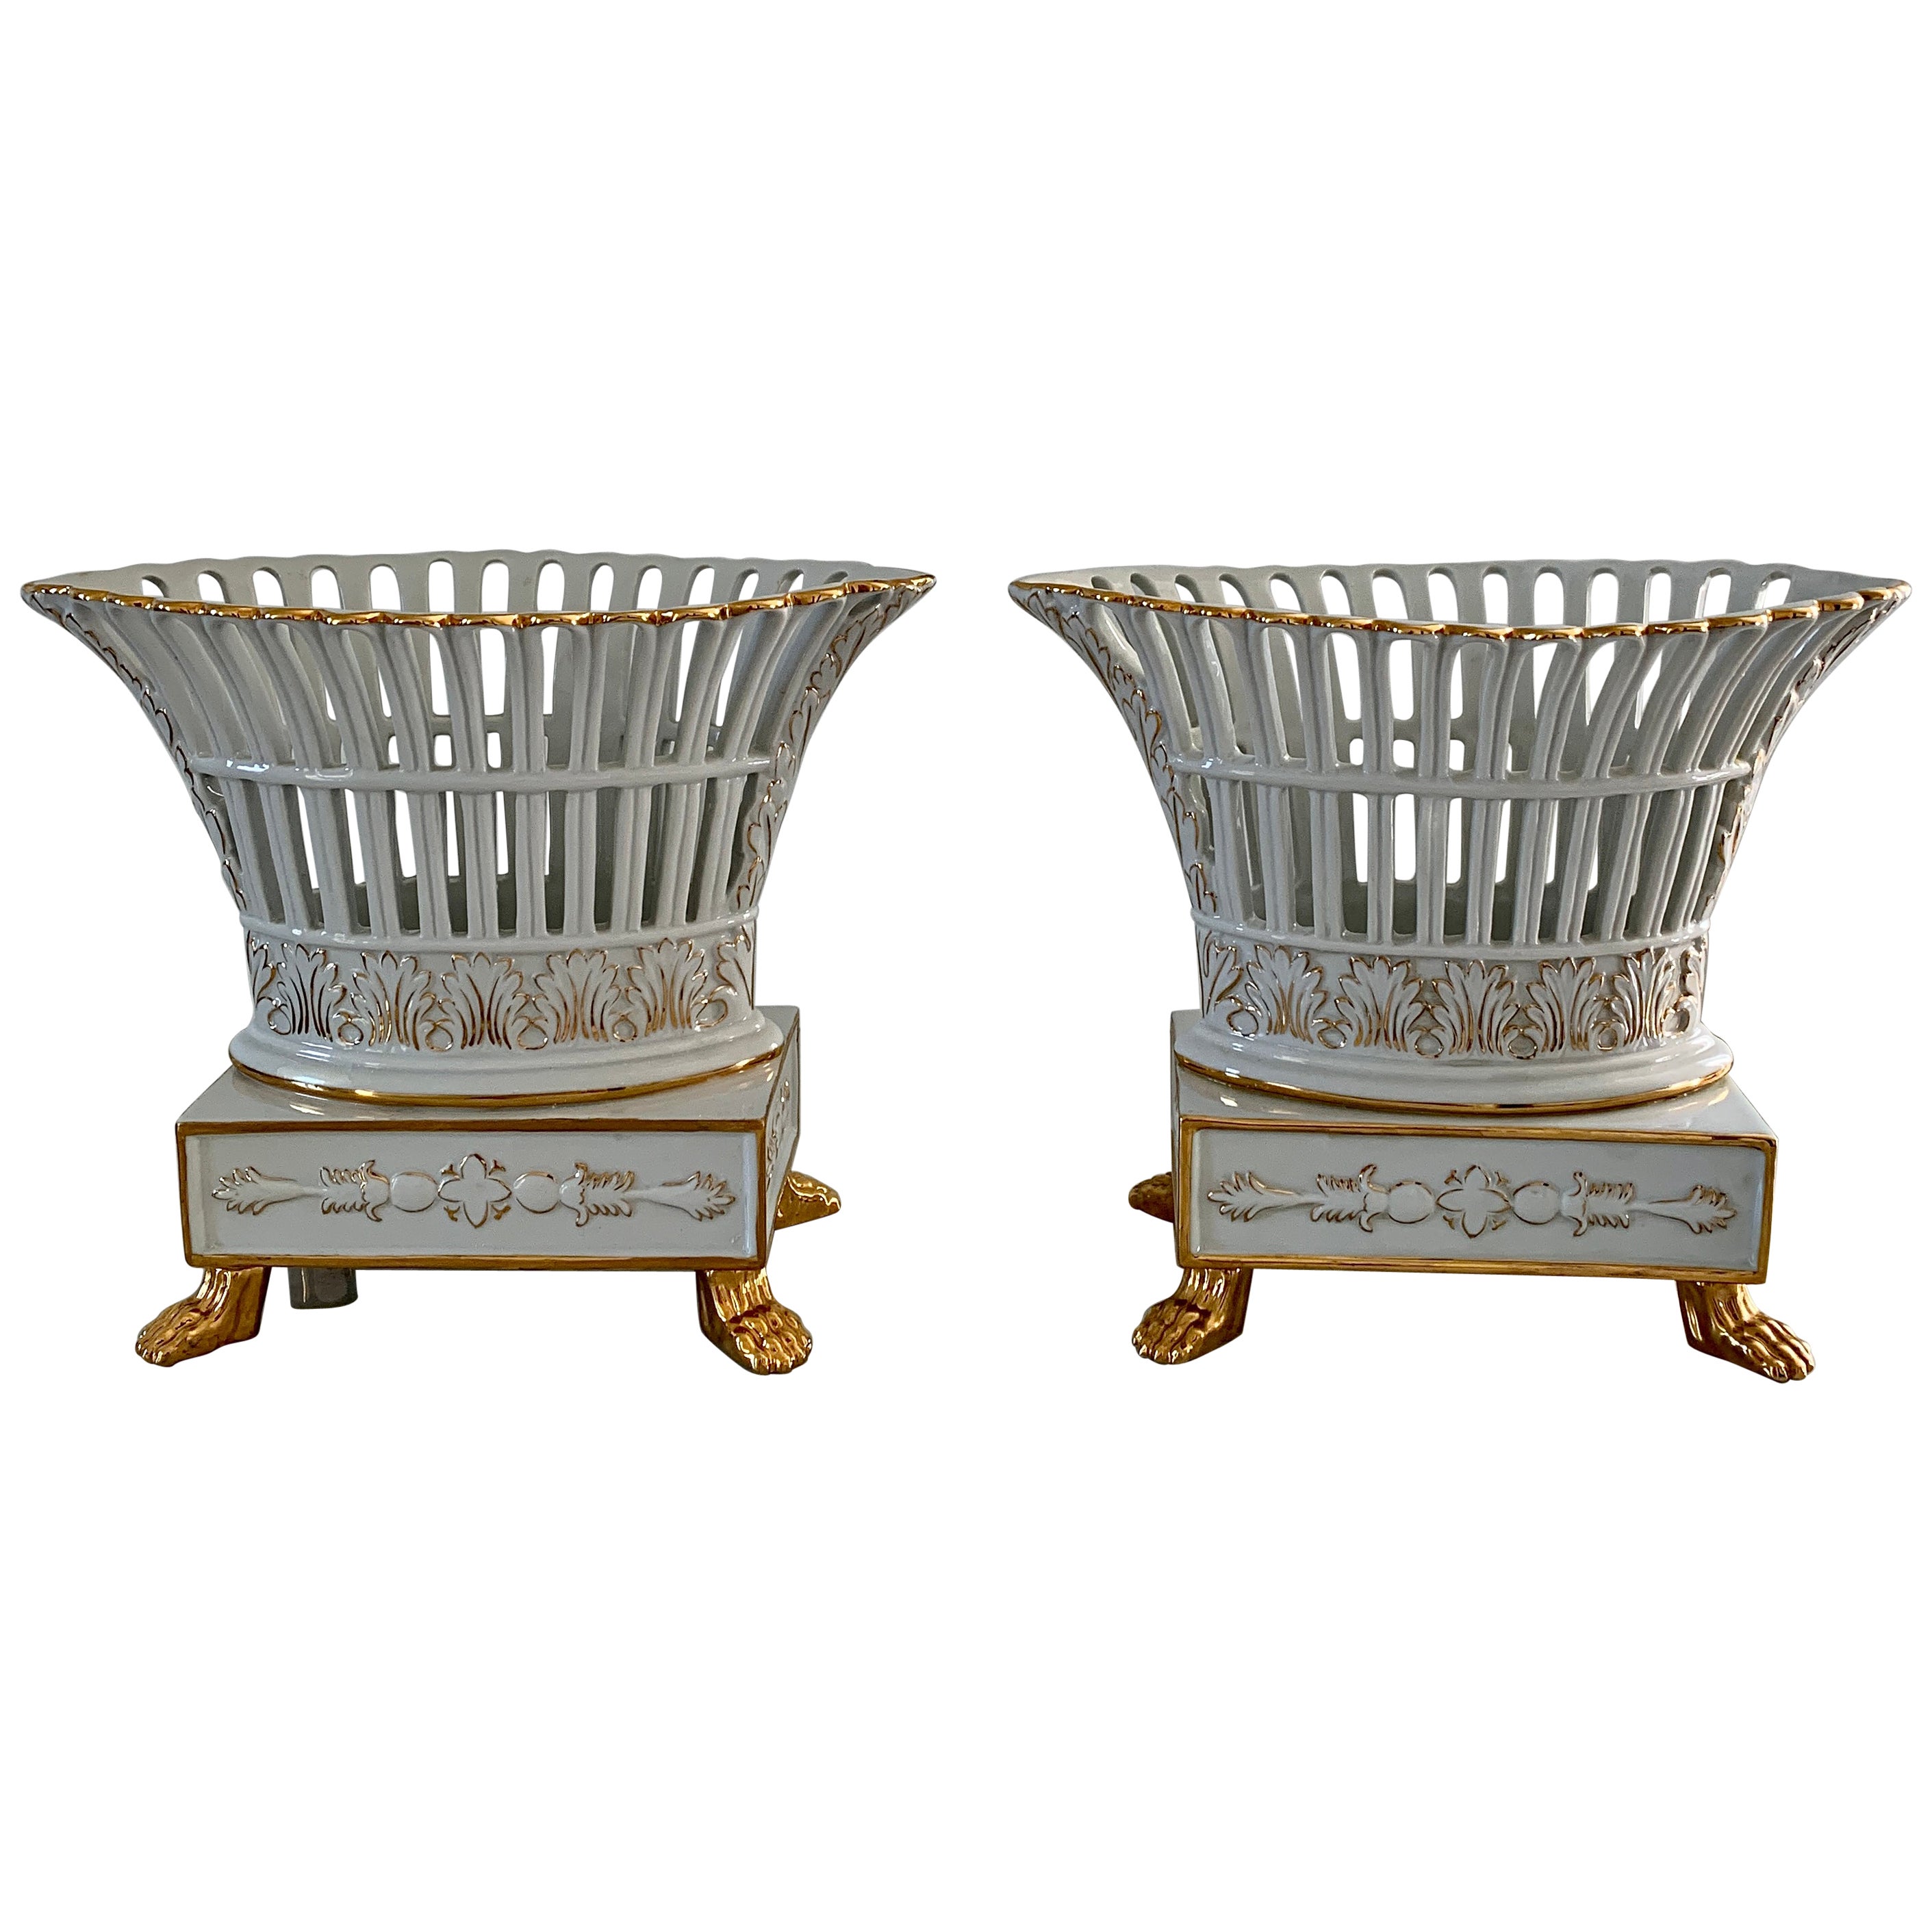 Neoclassical Regency Reticulated Gold Gilt Porcelain Basket Compotes, Pair For Sale